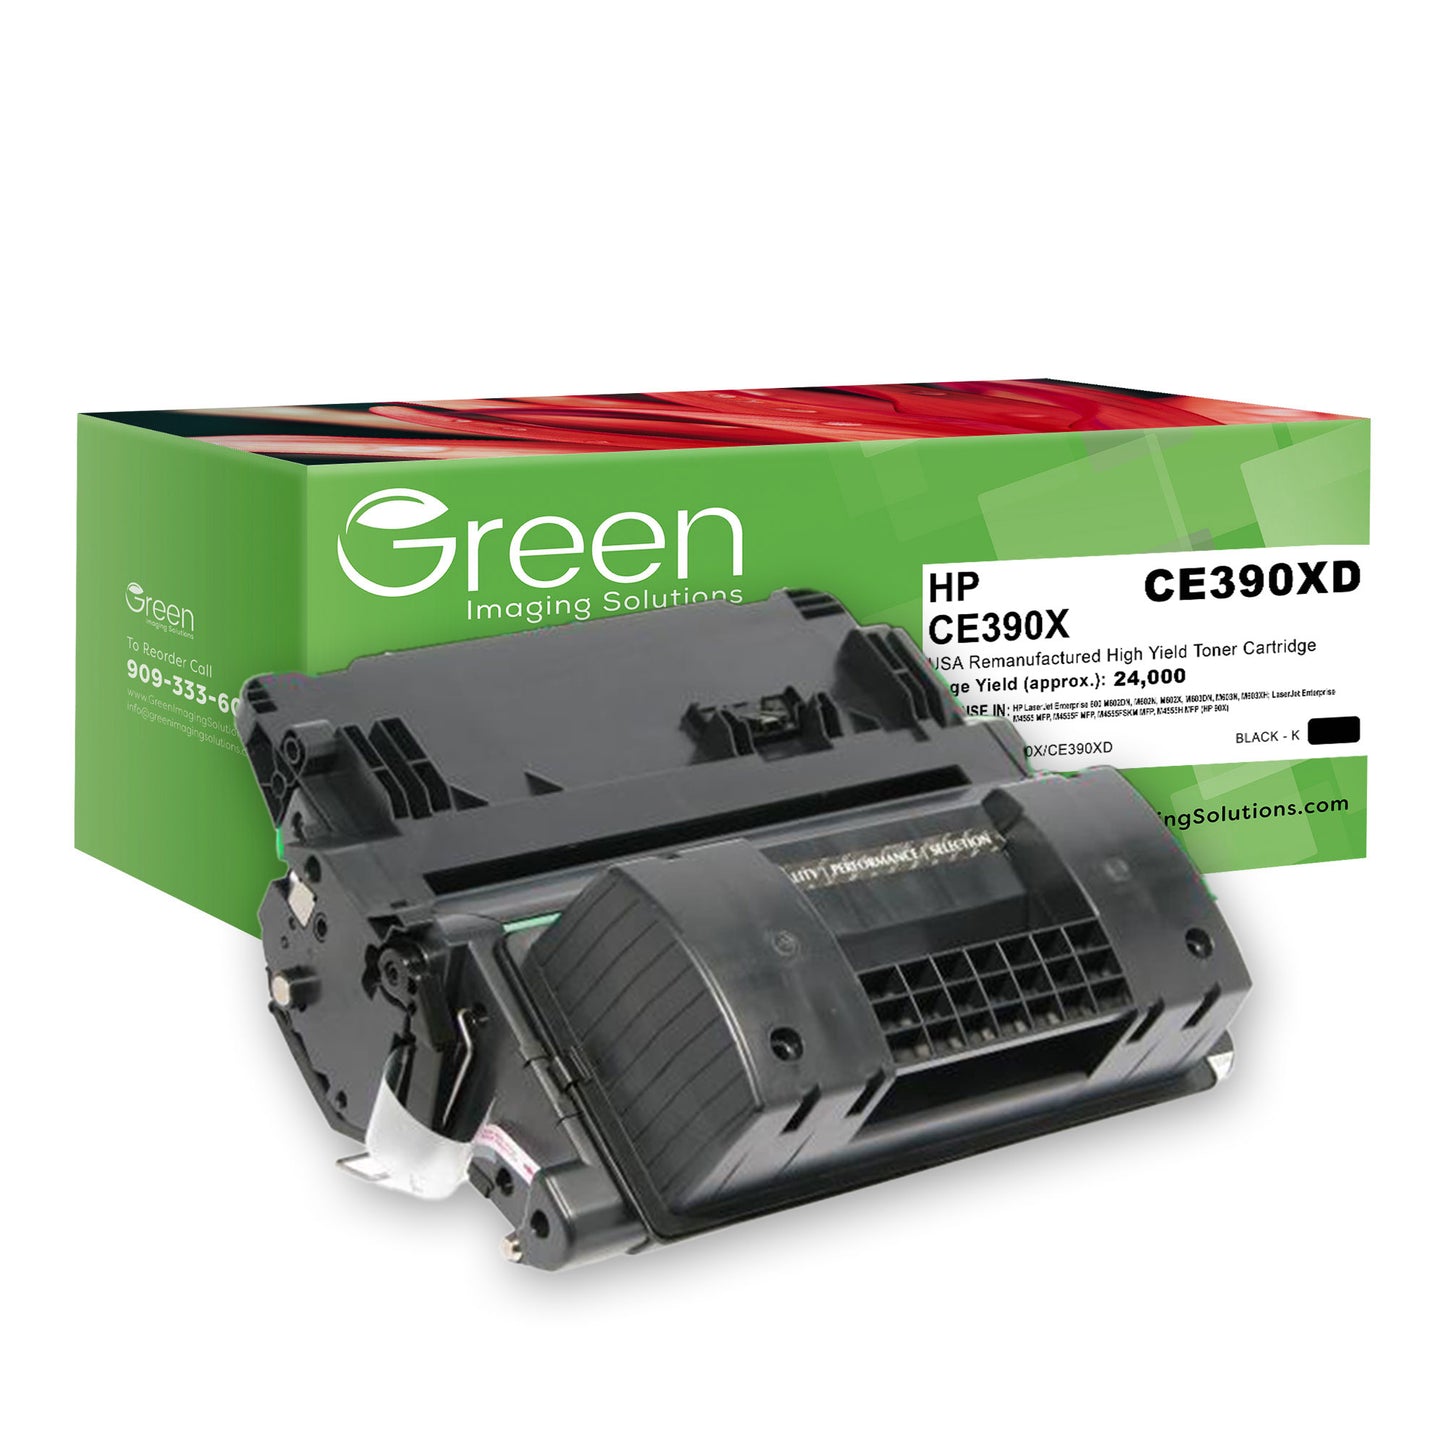 GIS USA Remanufactured High Yield Toner Cartridge for HP CE390X (HP 90X)